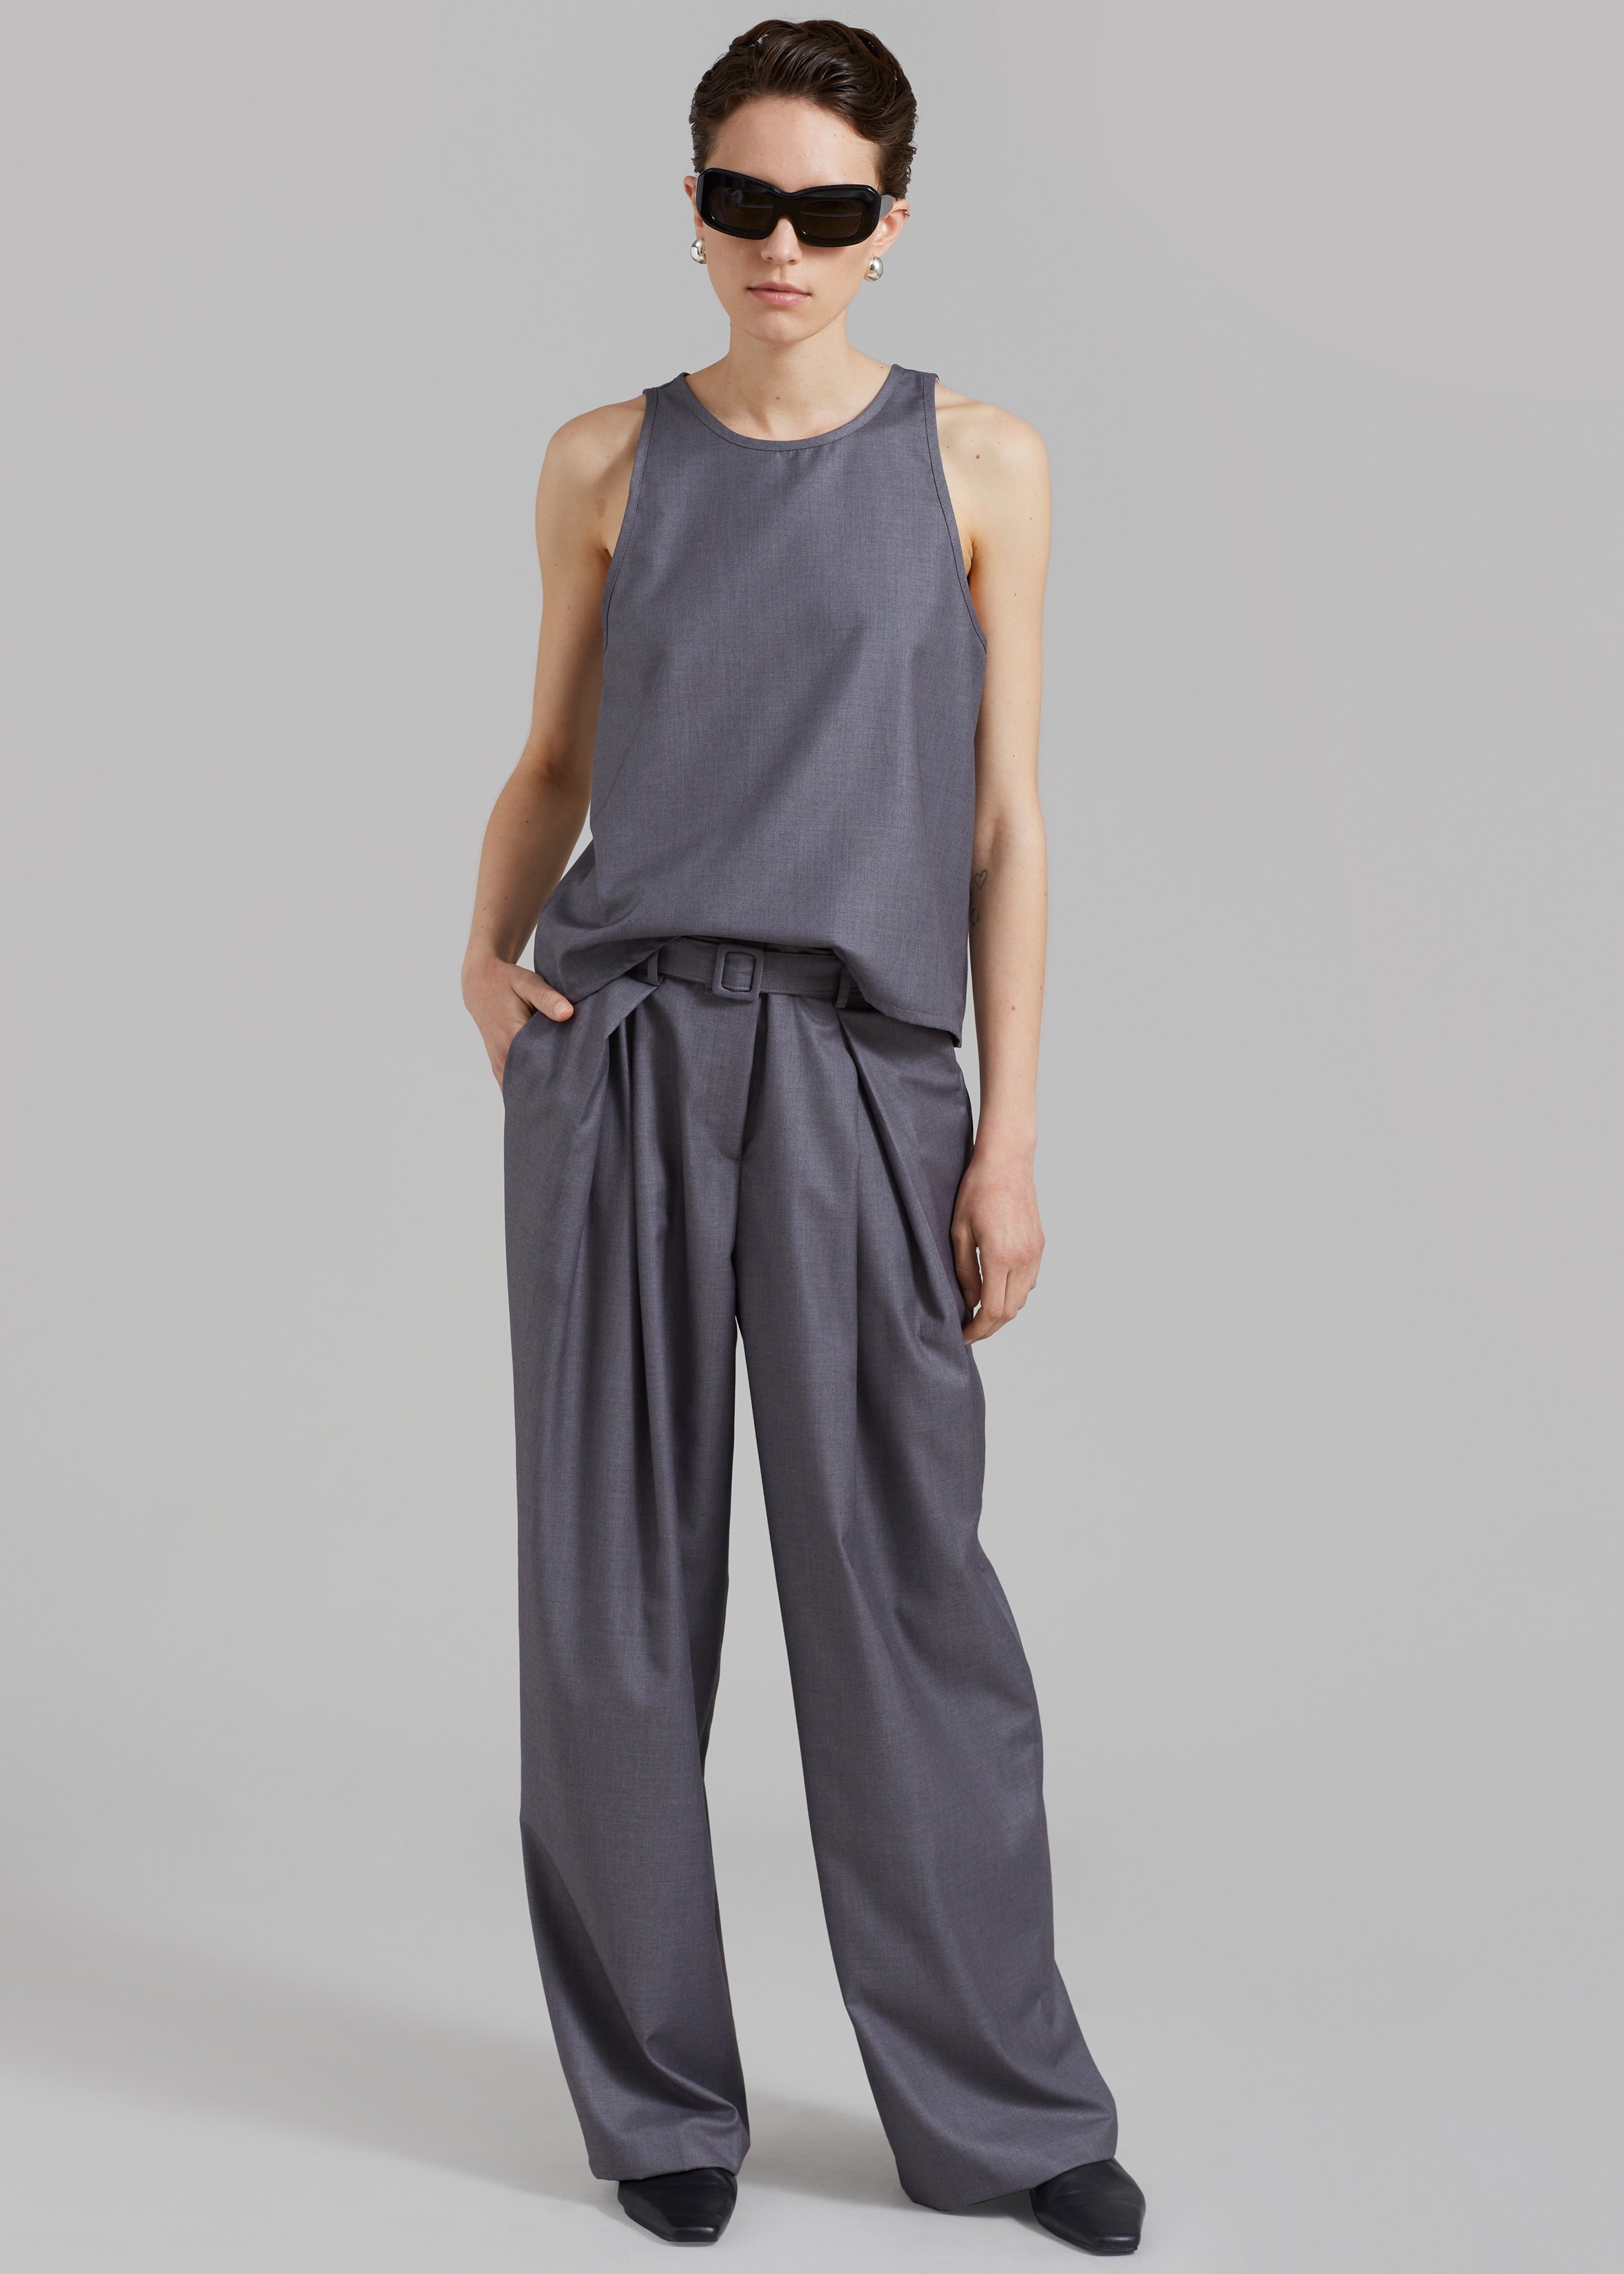 Clay Belted Pants - Grey - 1